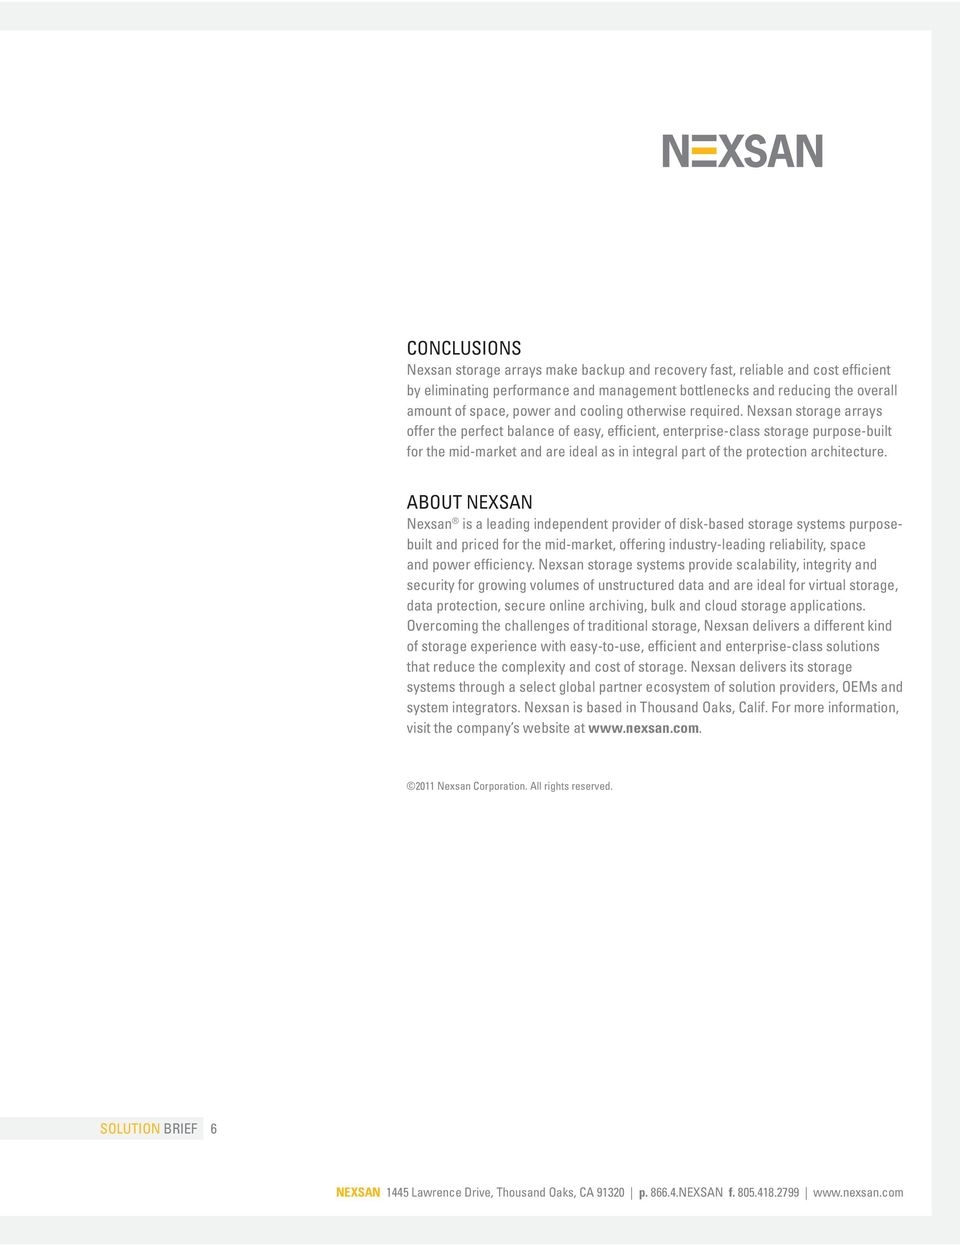 Nexsan storage arrays offer the perfect balance of easy, efficient, enterprise-class storage purpose-built for the mid-market and are ideal as in integral part of the protection architecture.